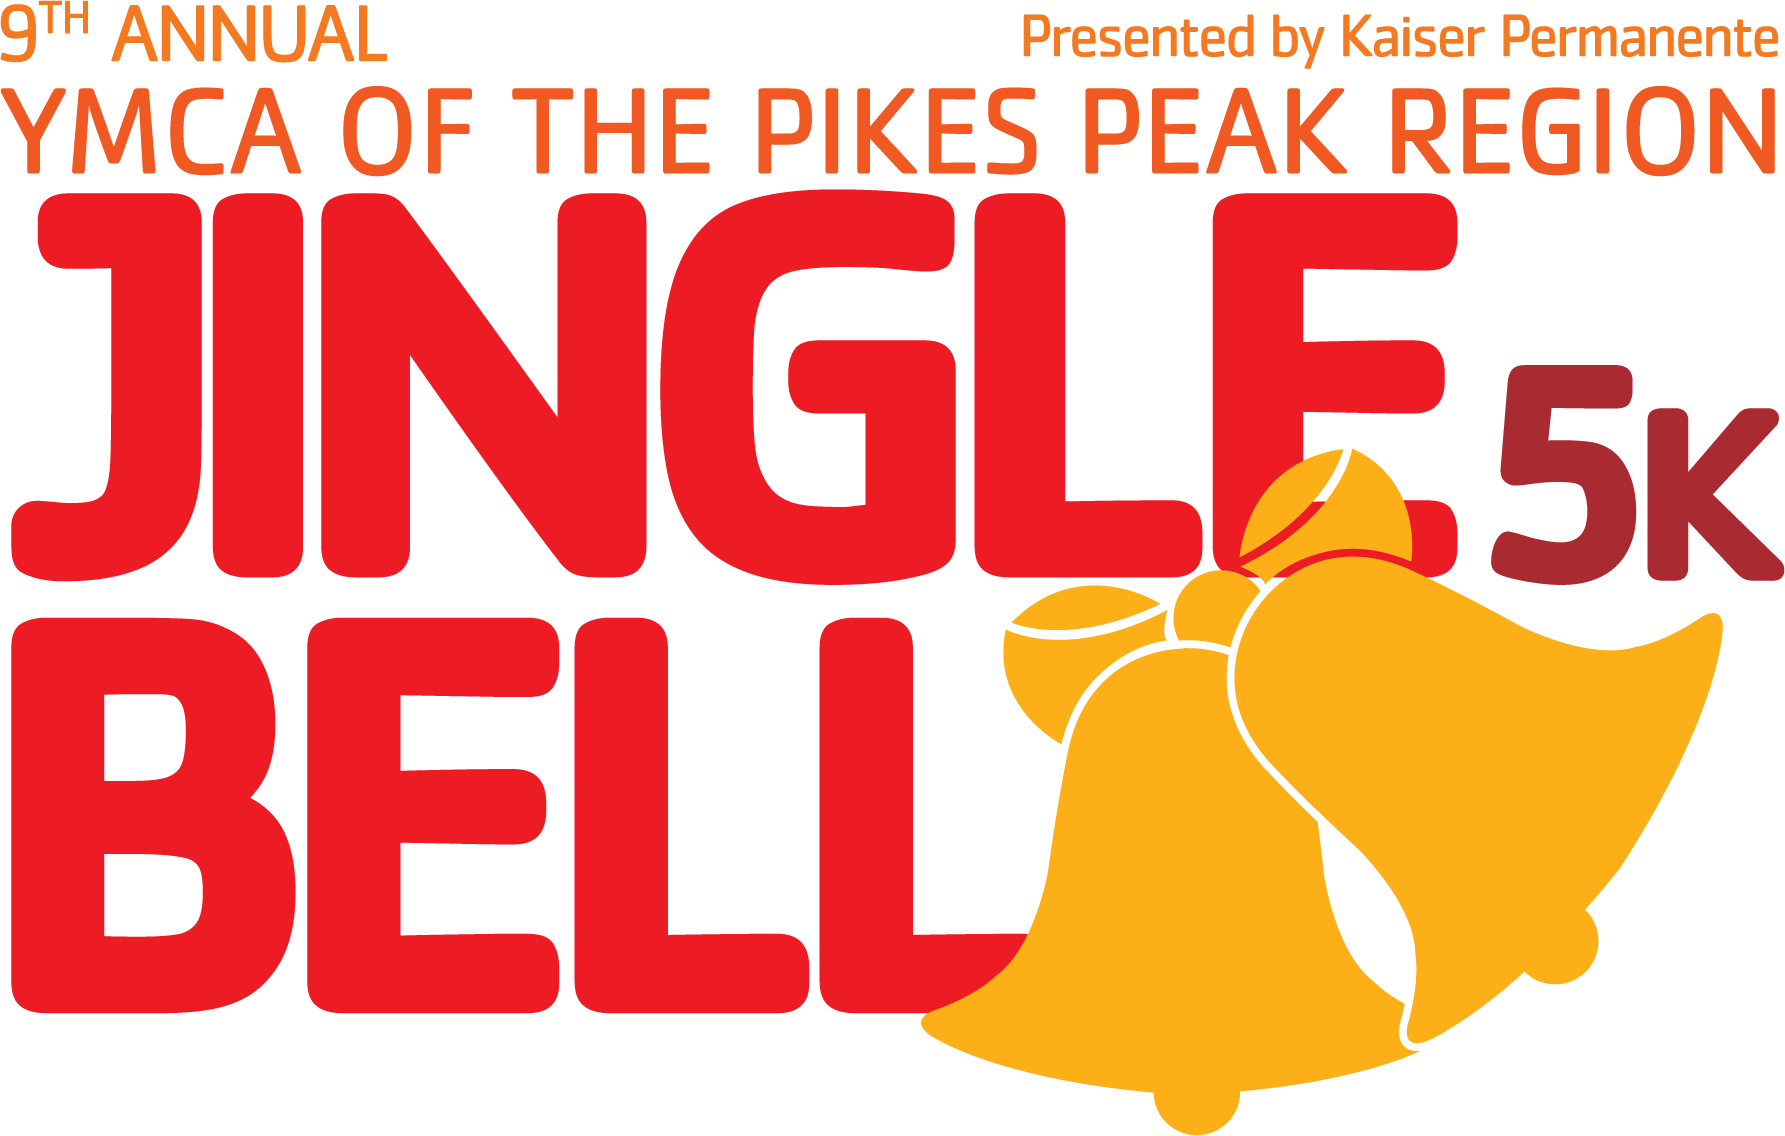 Jingle Bell 5k Presented By Ymca Of The Pikes Peak - Poster (1785x1136)